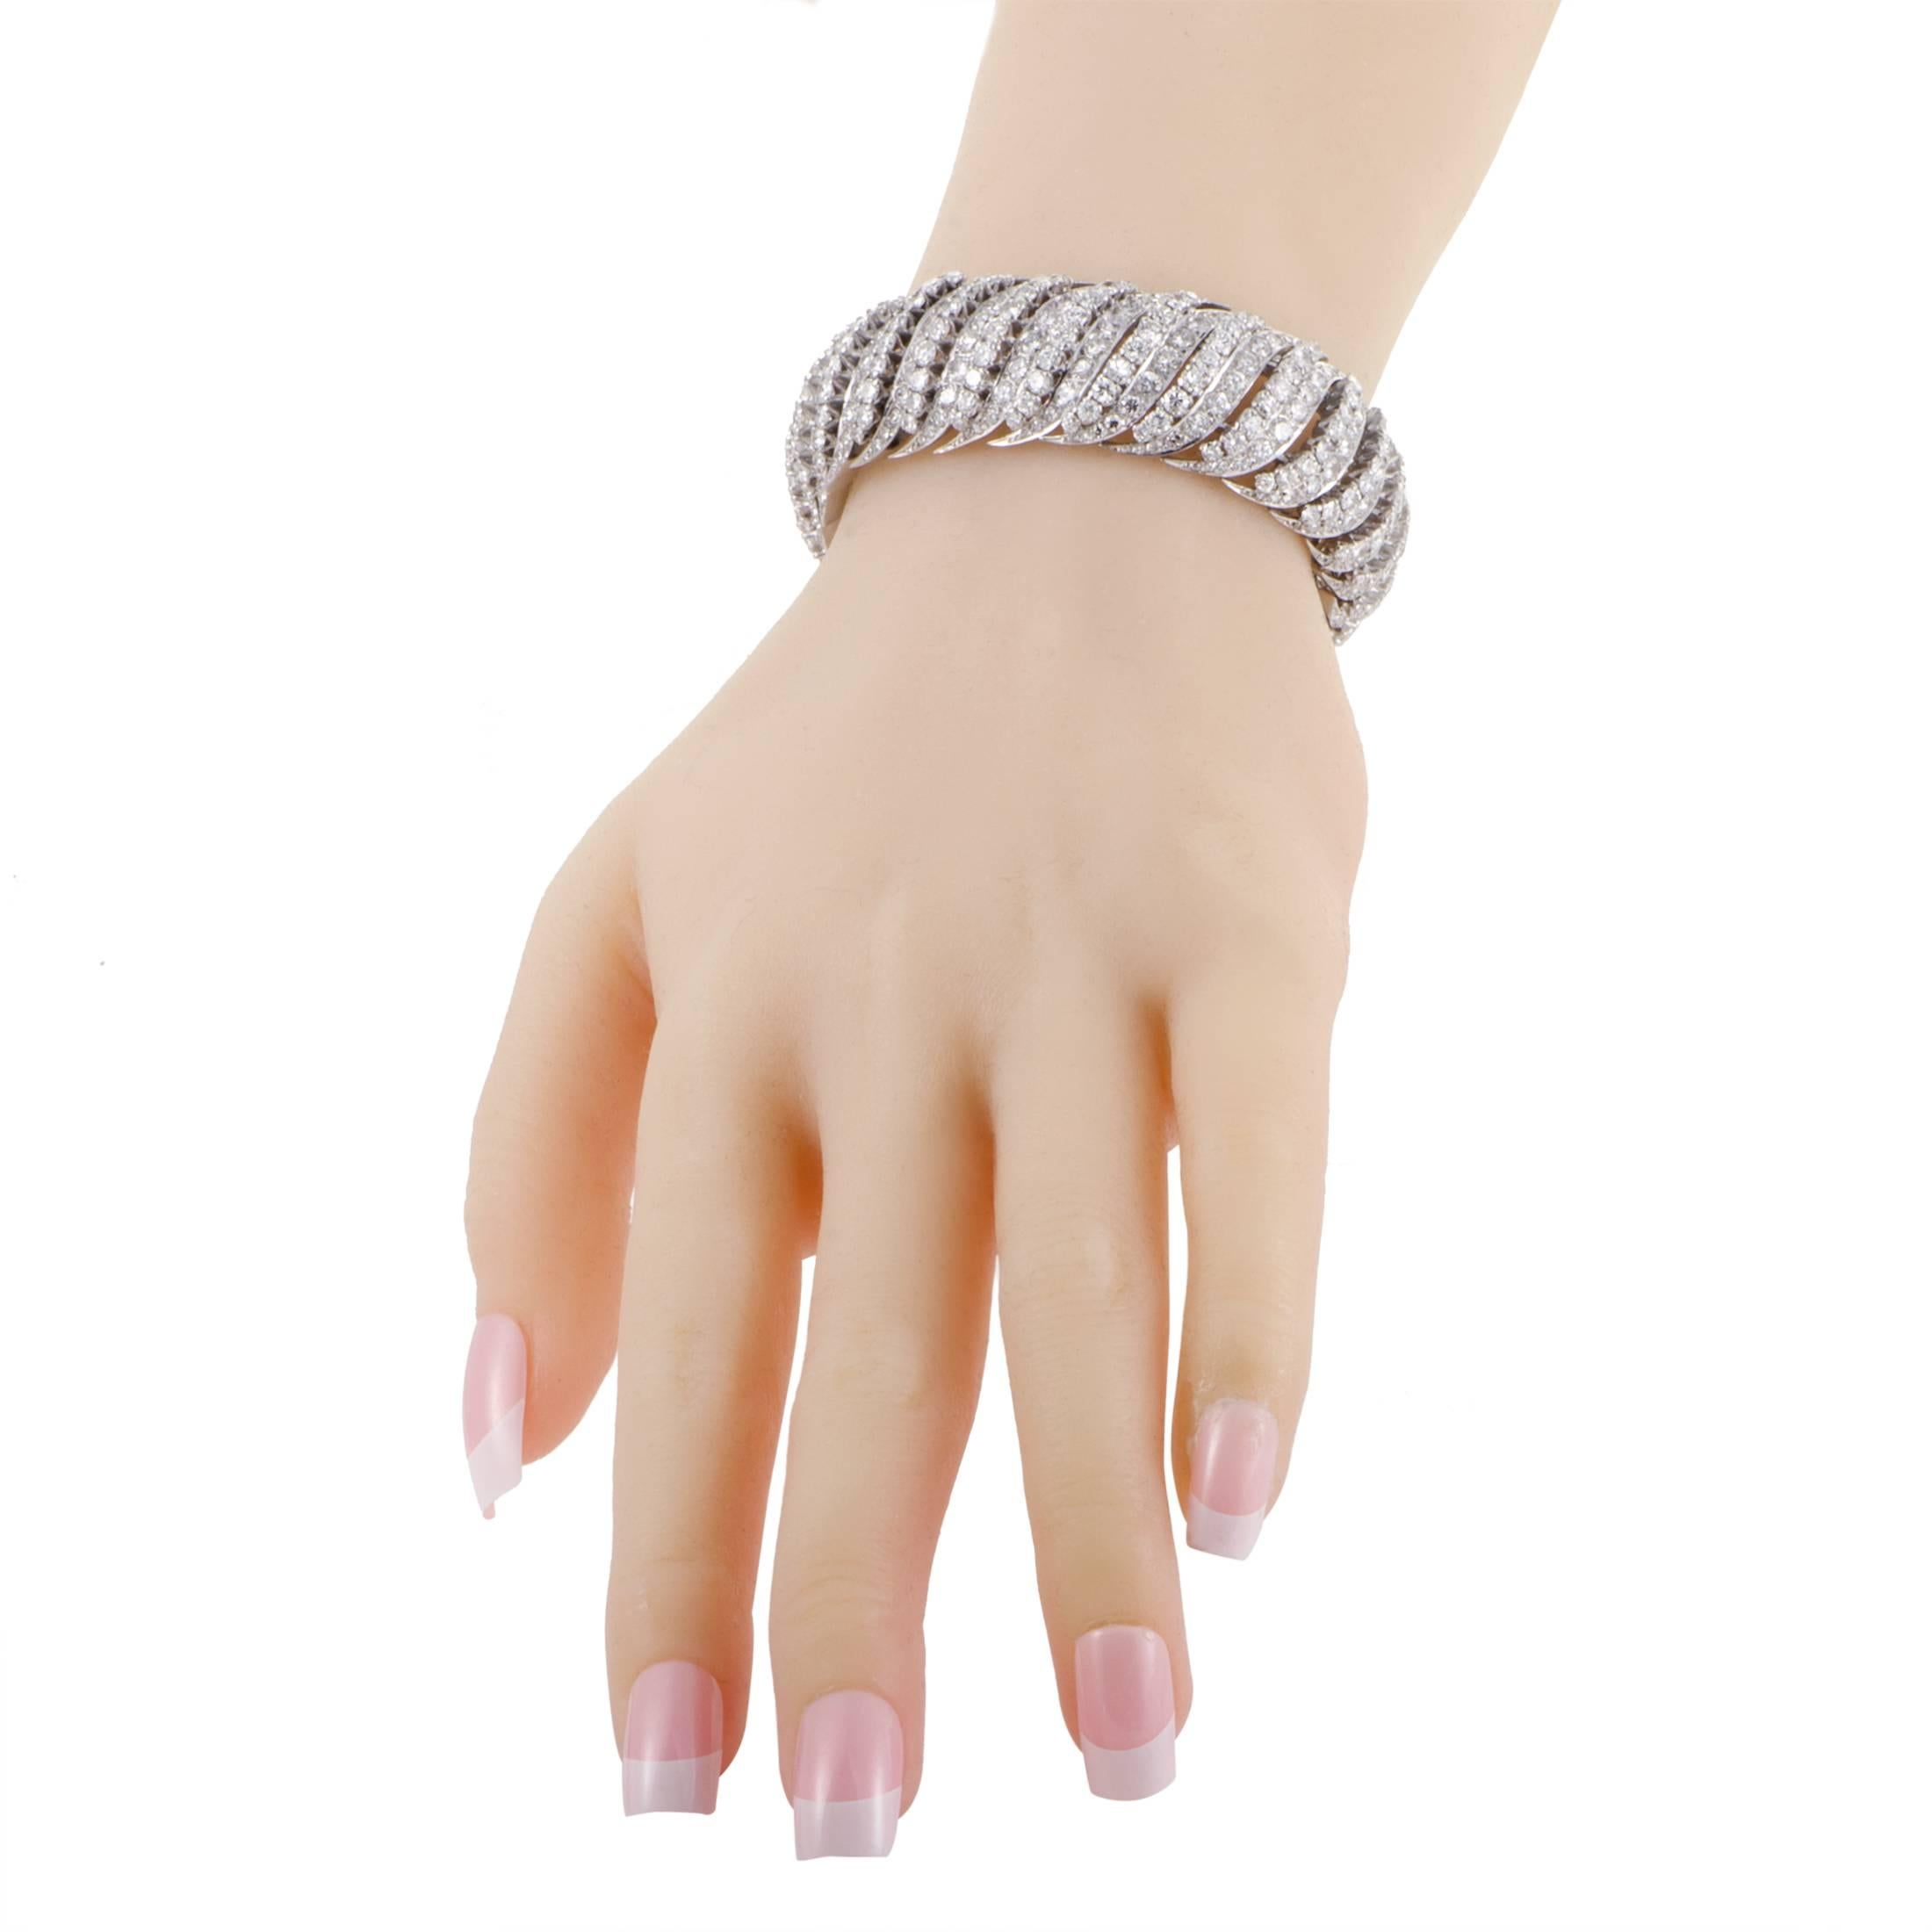 A spellbinding, pure and stylish expression of utmost prestige, this extraordinary bangle is made of intriguingly entwined platinum which is lavishly embellished with tantalizing diamonds weighing in total approximately 31.00 carats for a